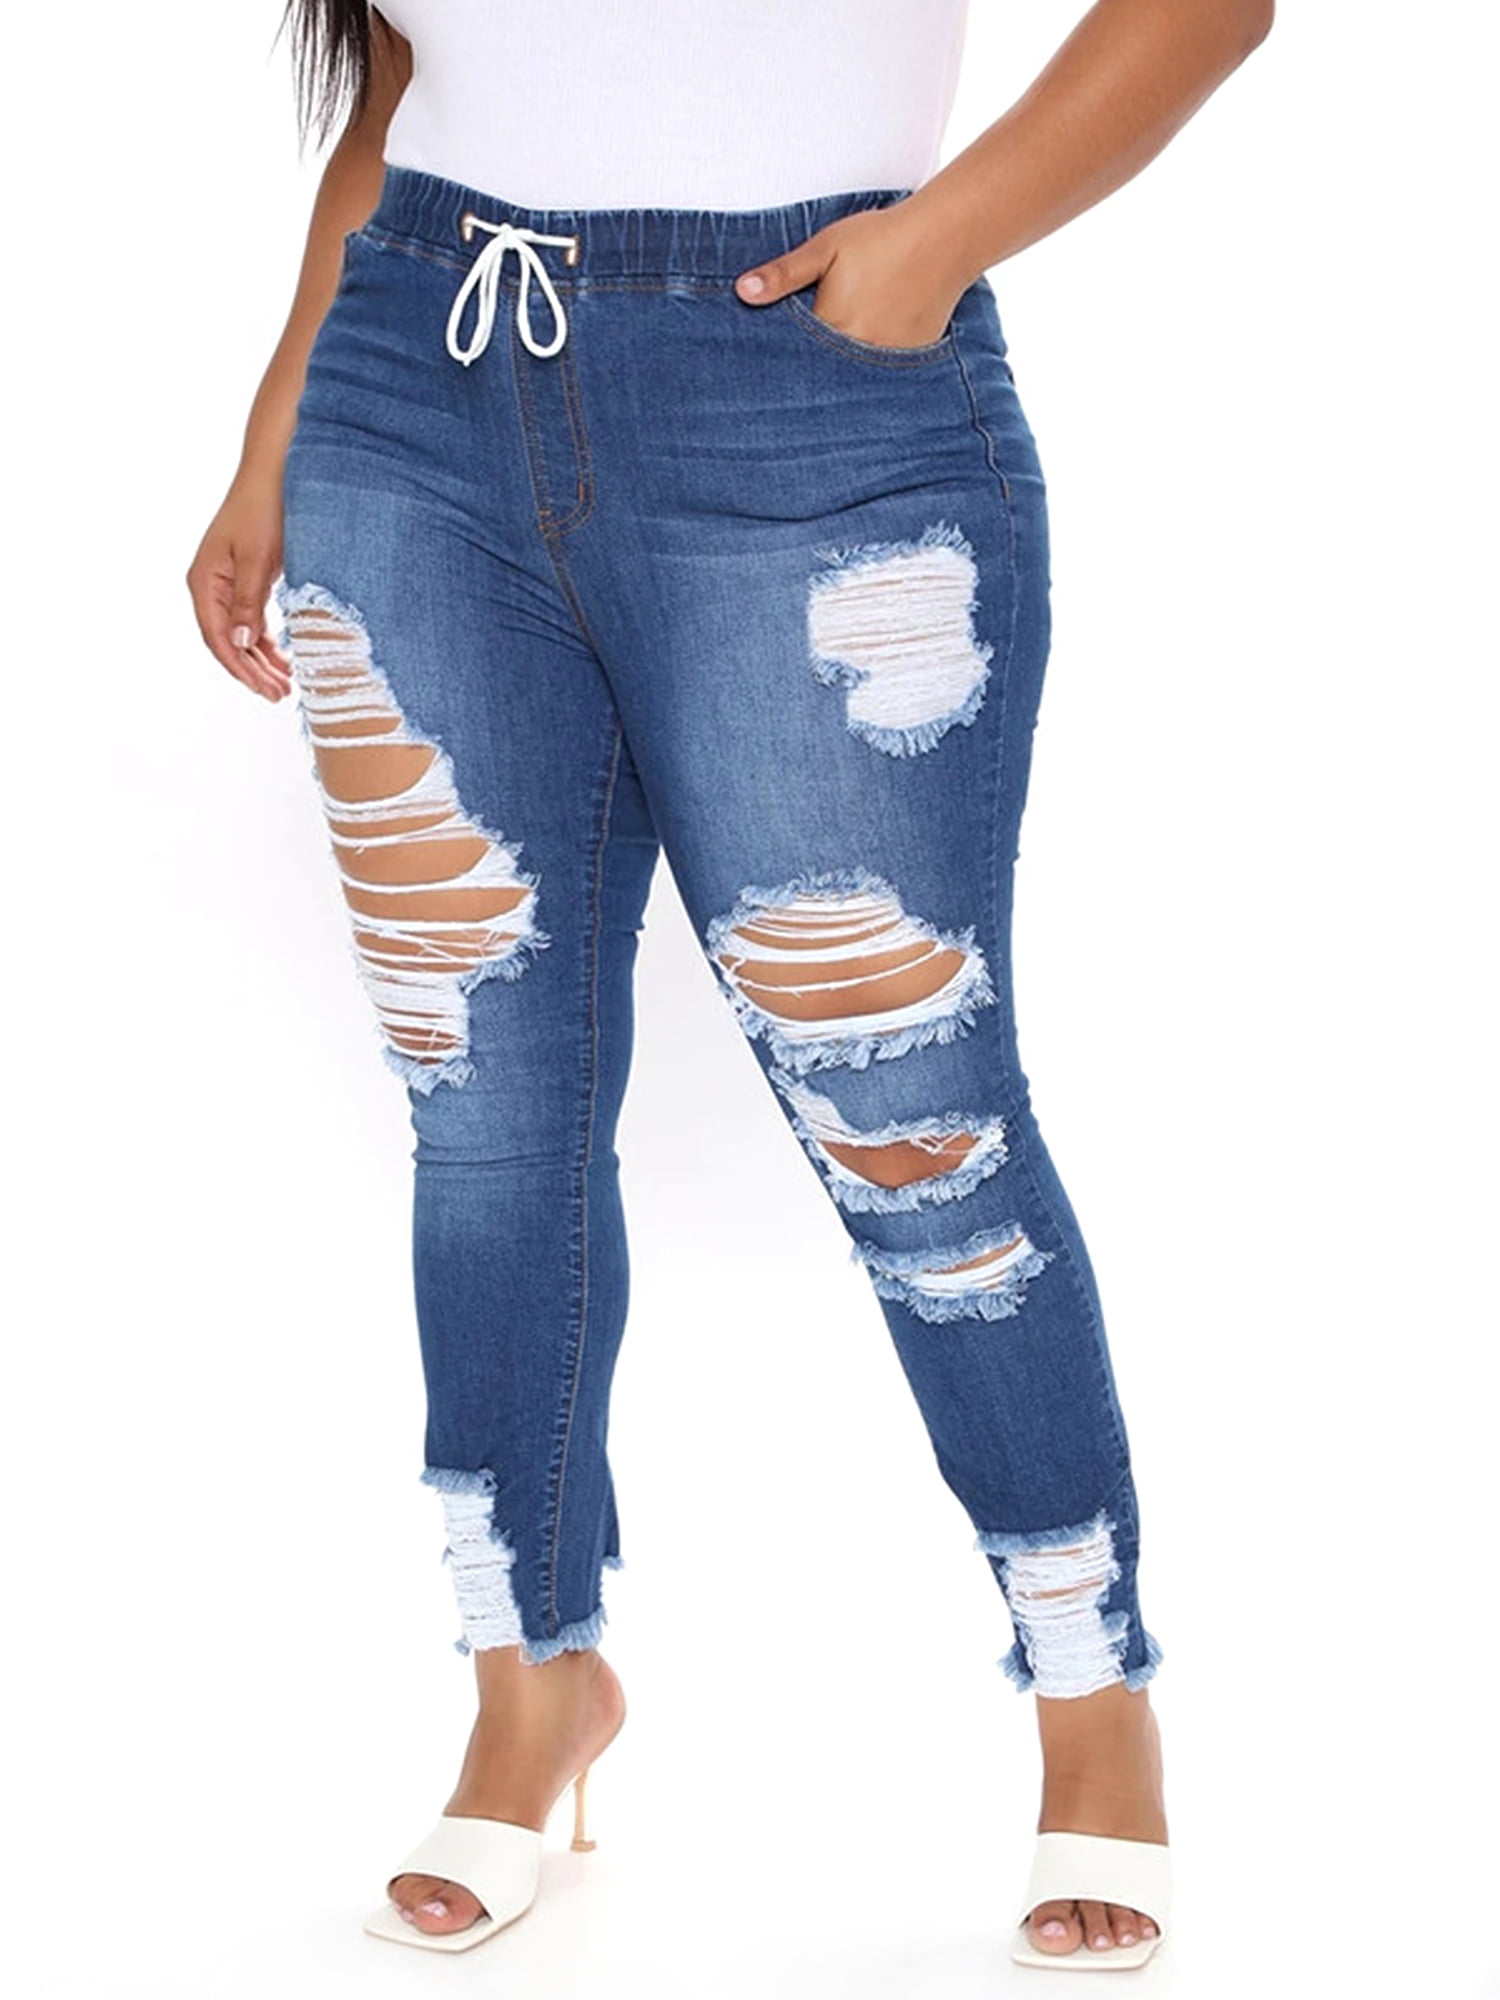 Women Skinny Ripped Long Pants High Waist Stretch Jeans Pants Pencil Trousers 